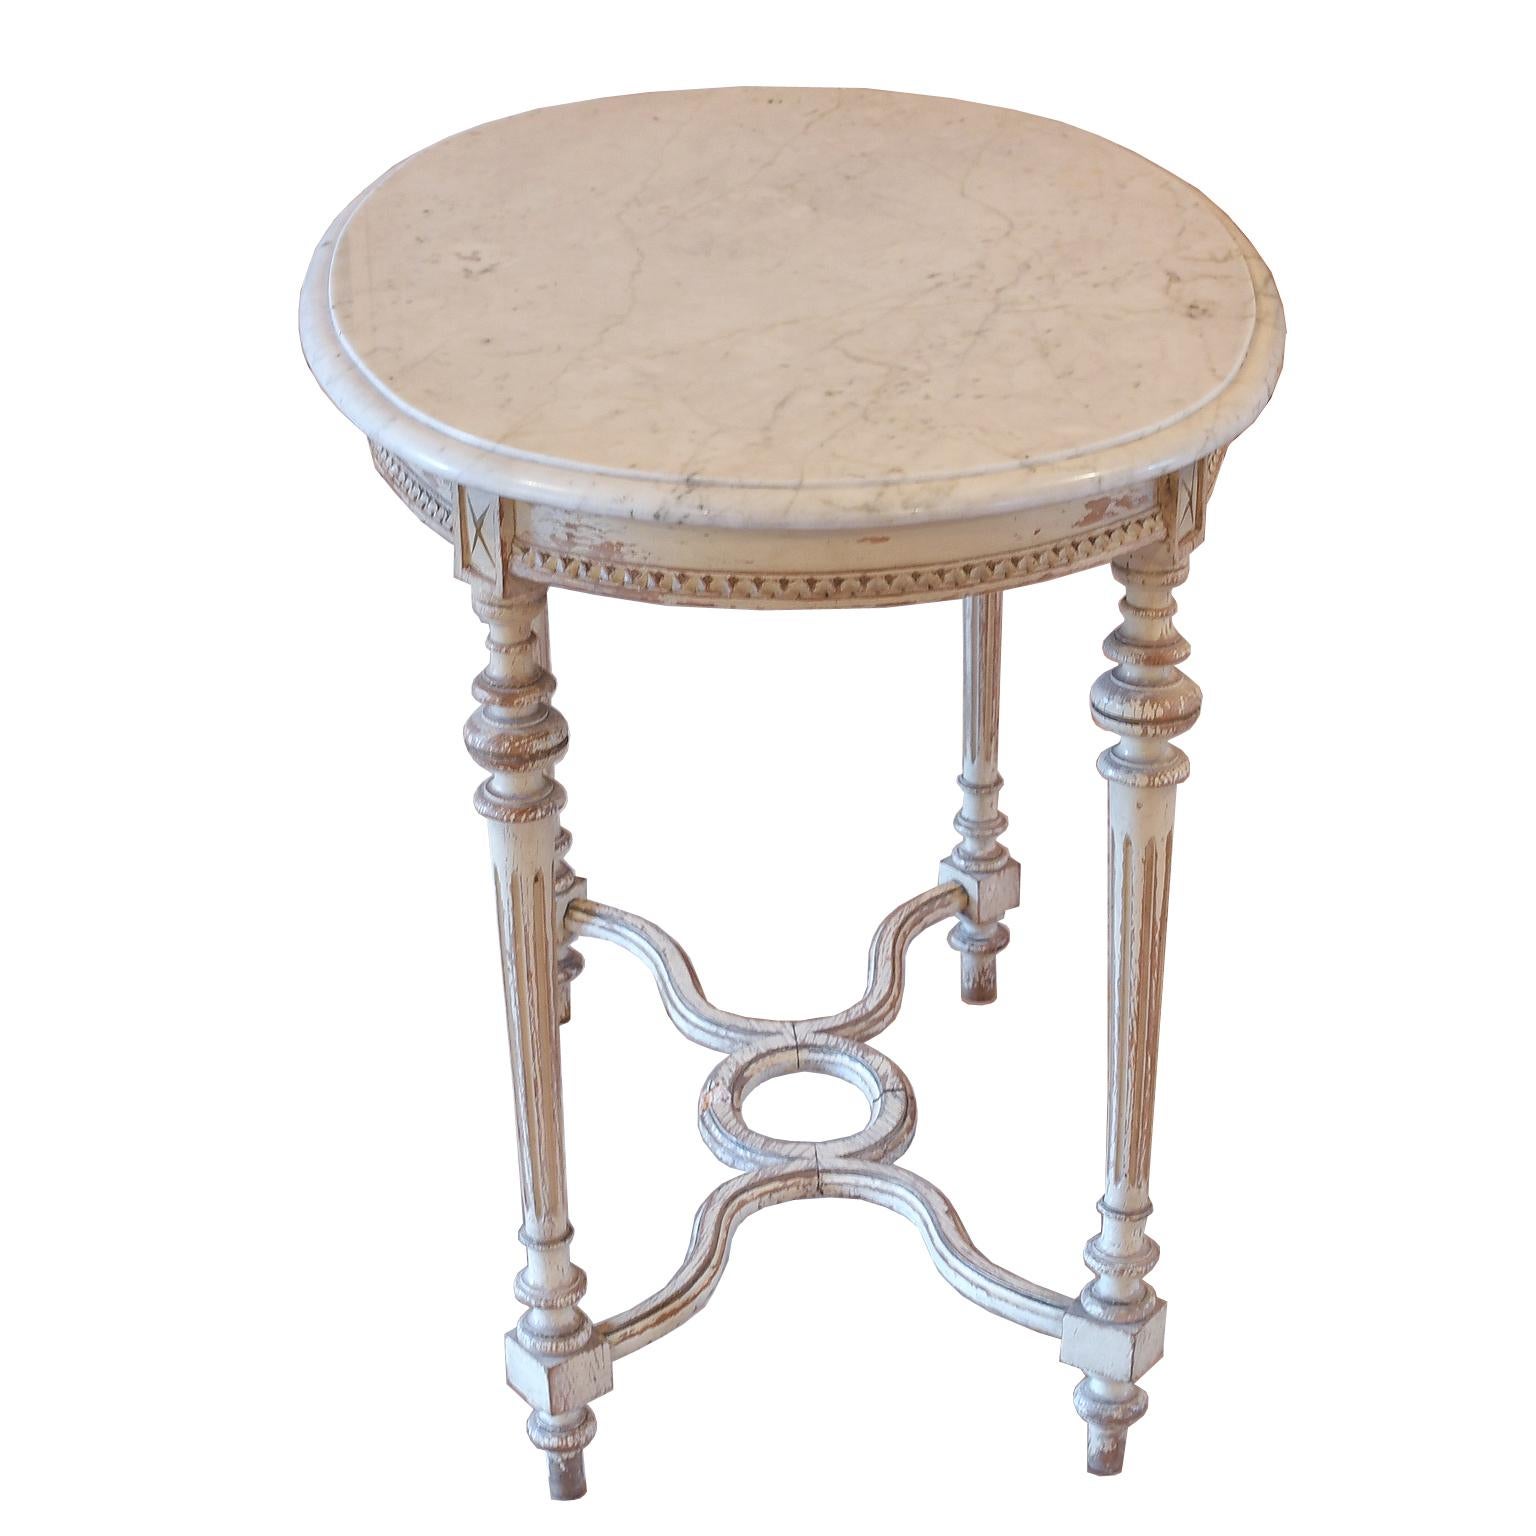 Hand-Carved Antique Swedish Louis XVI Style Oval Salon/ Center Table w/ Grey Paint & Marble